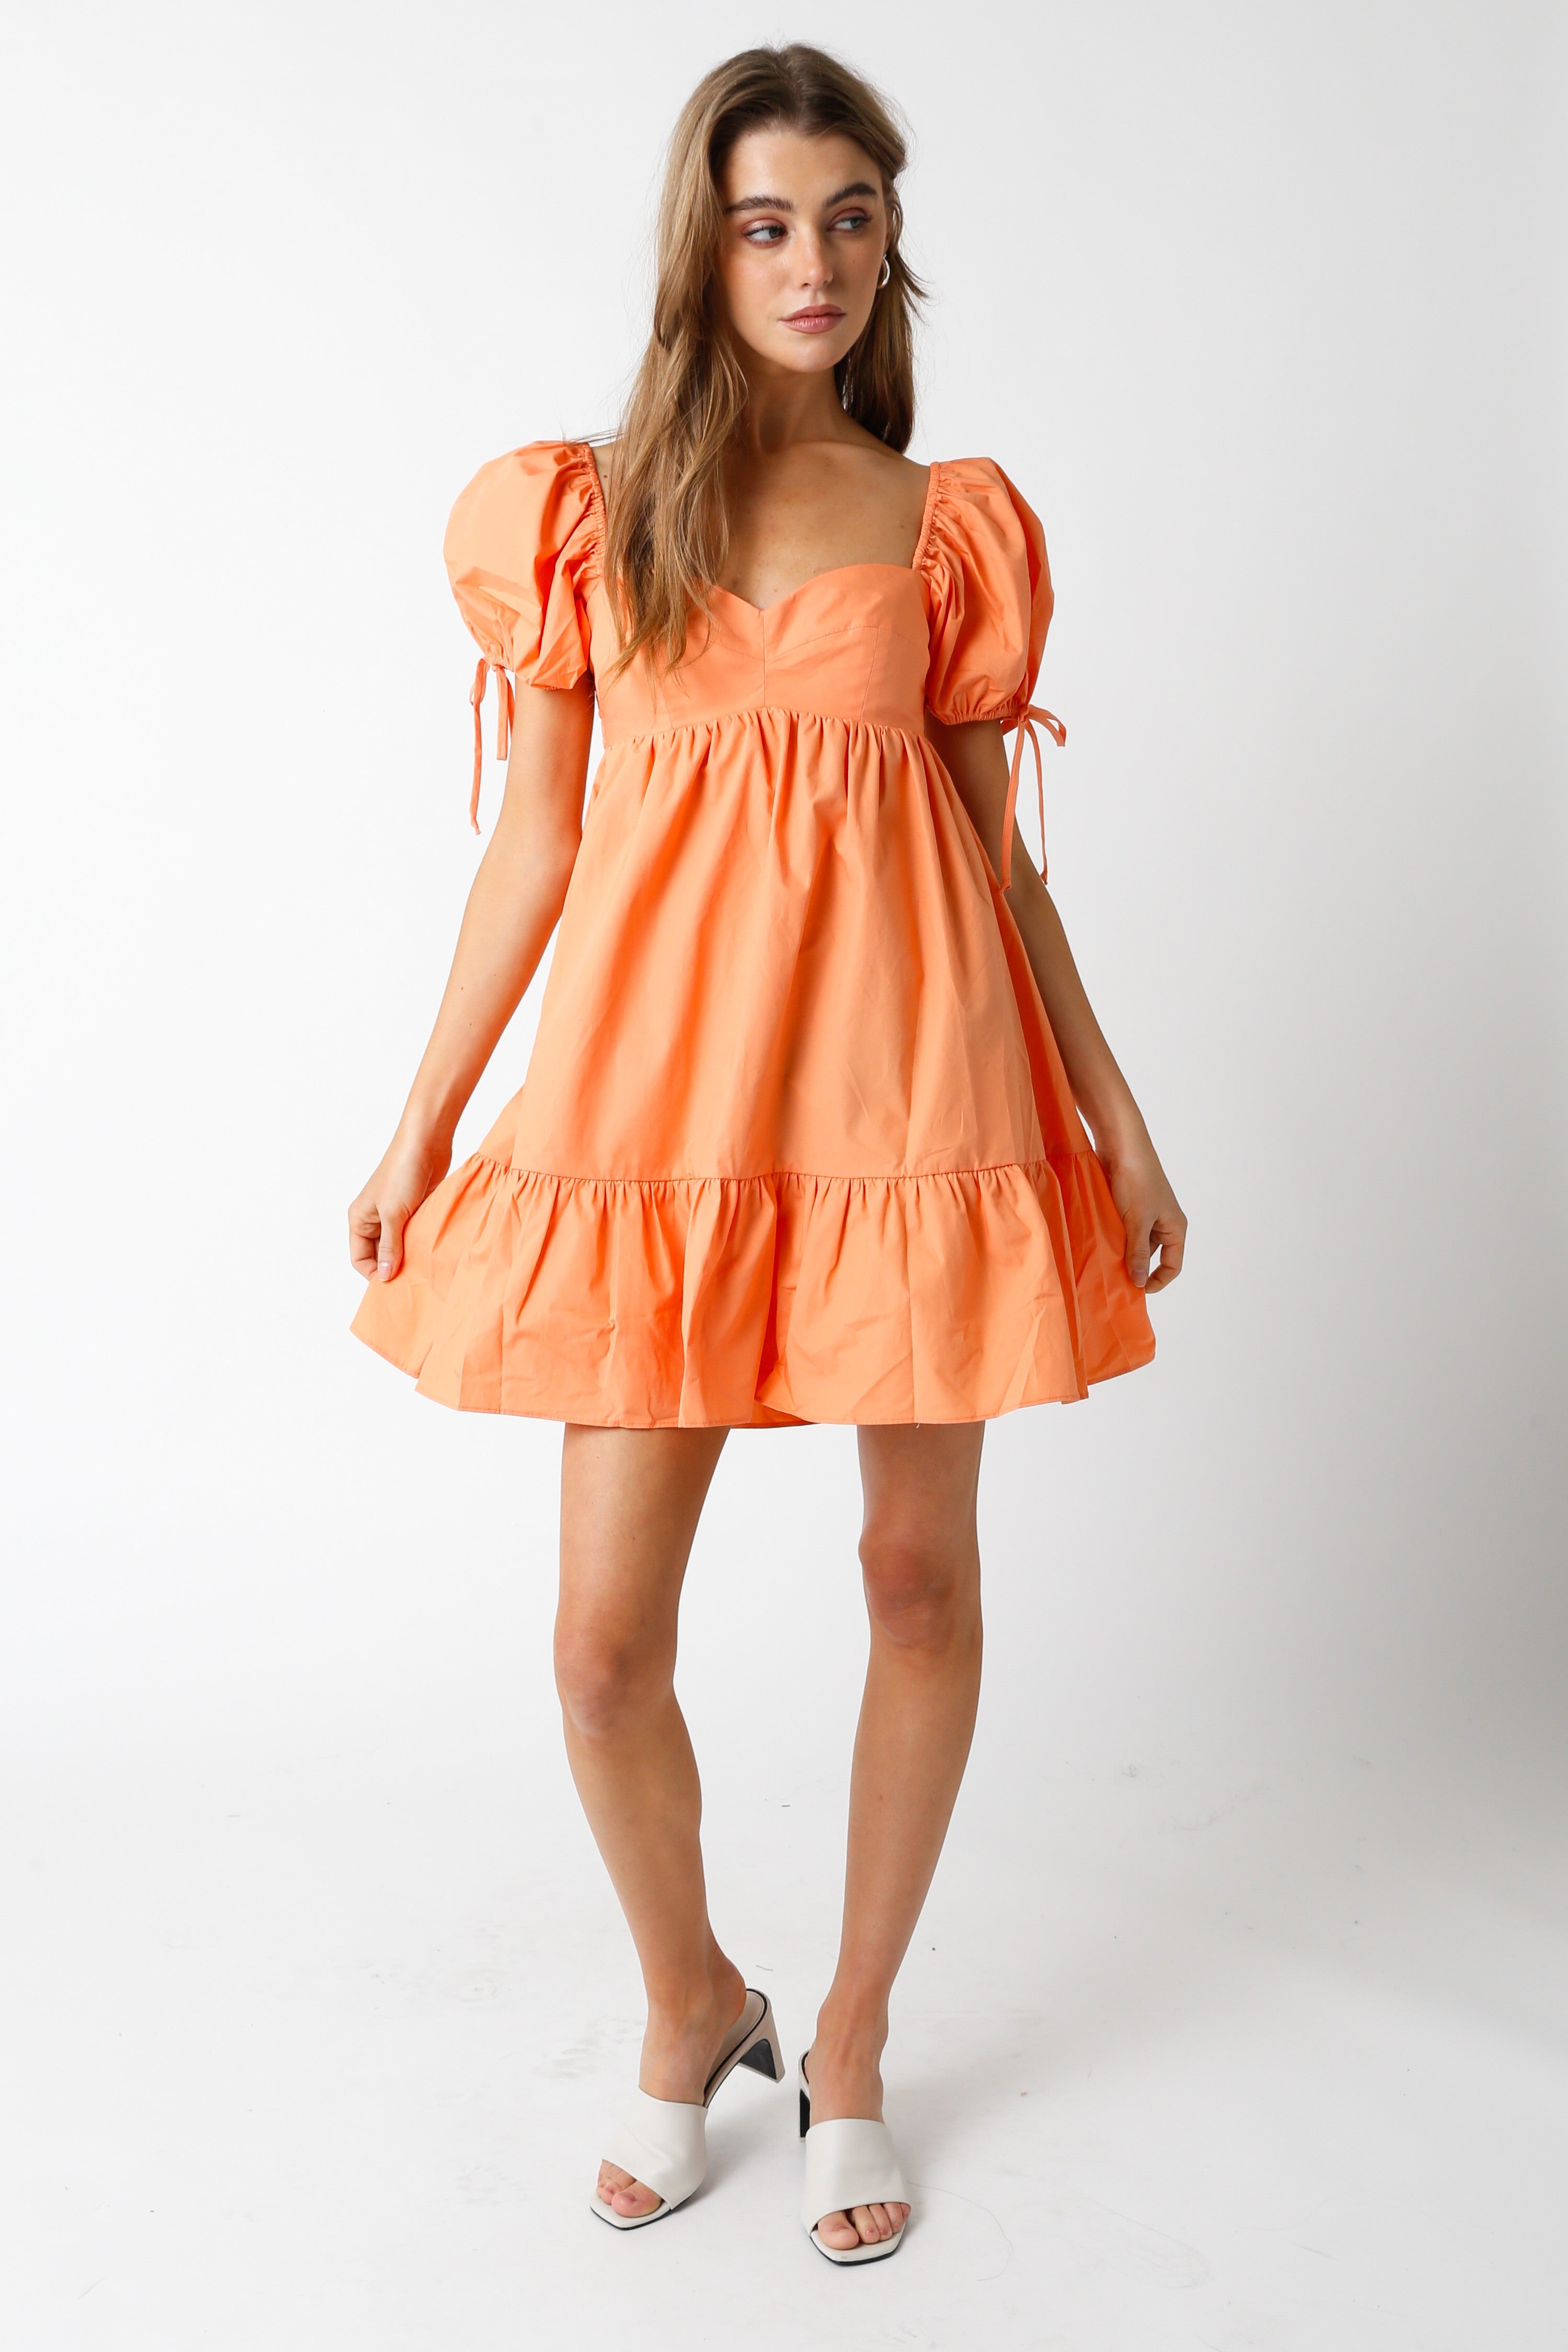 Apricot Baby Doll Tie Dress | Collective Request 